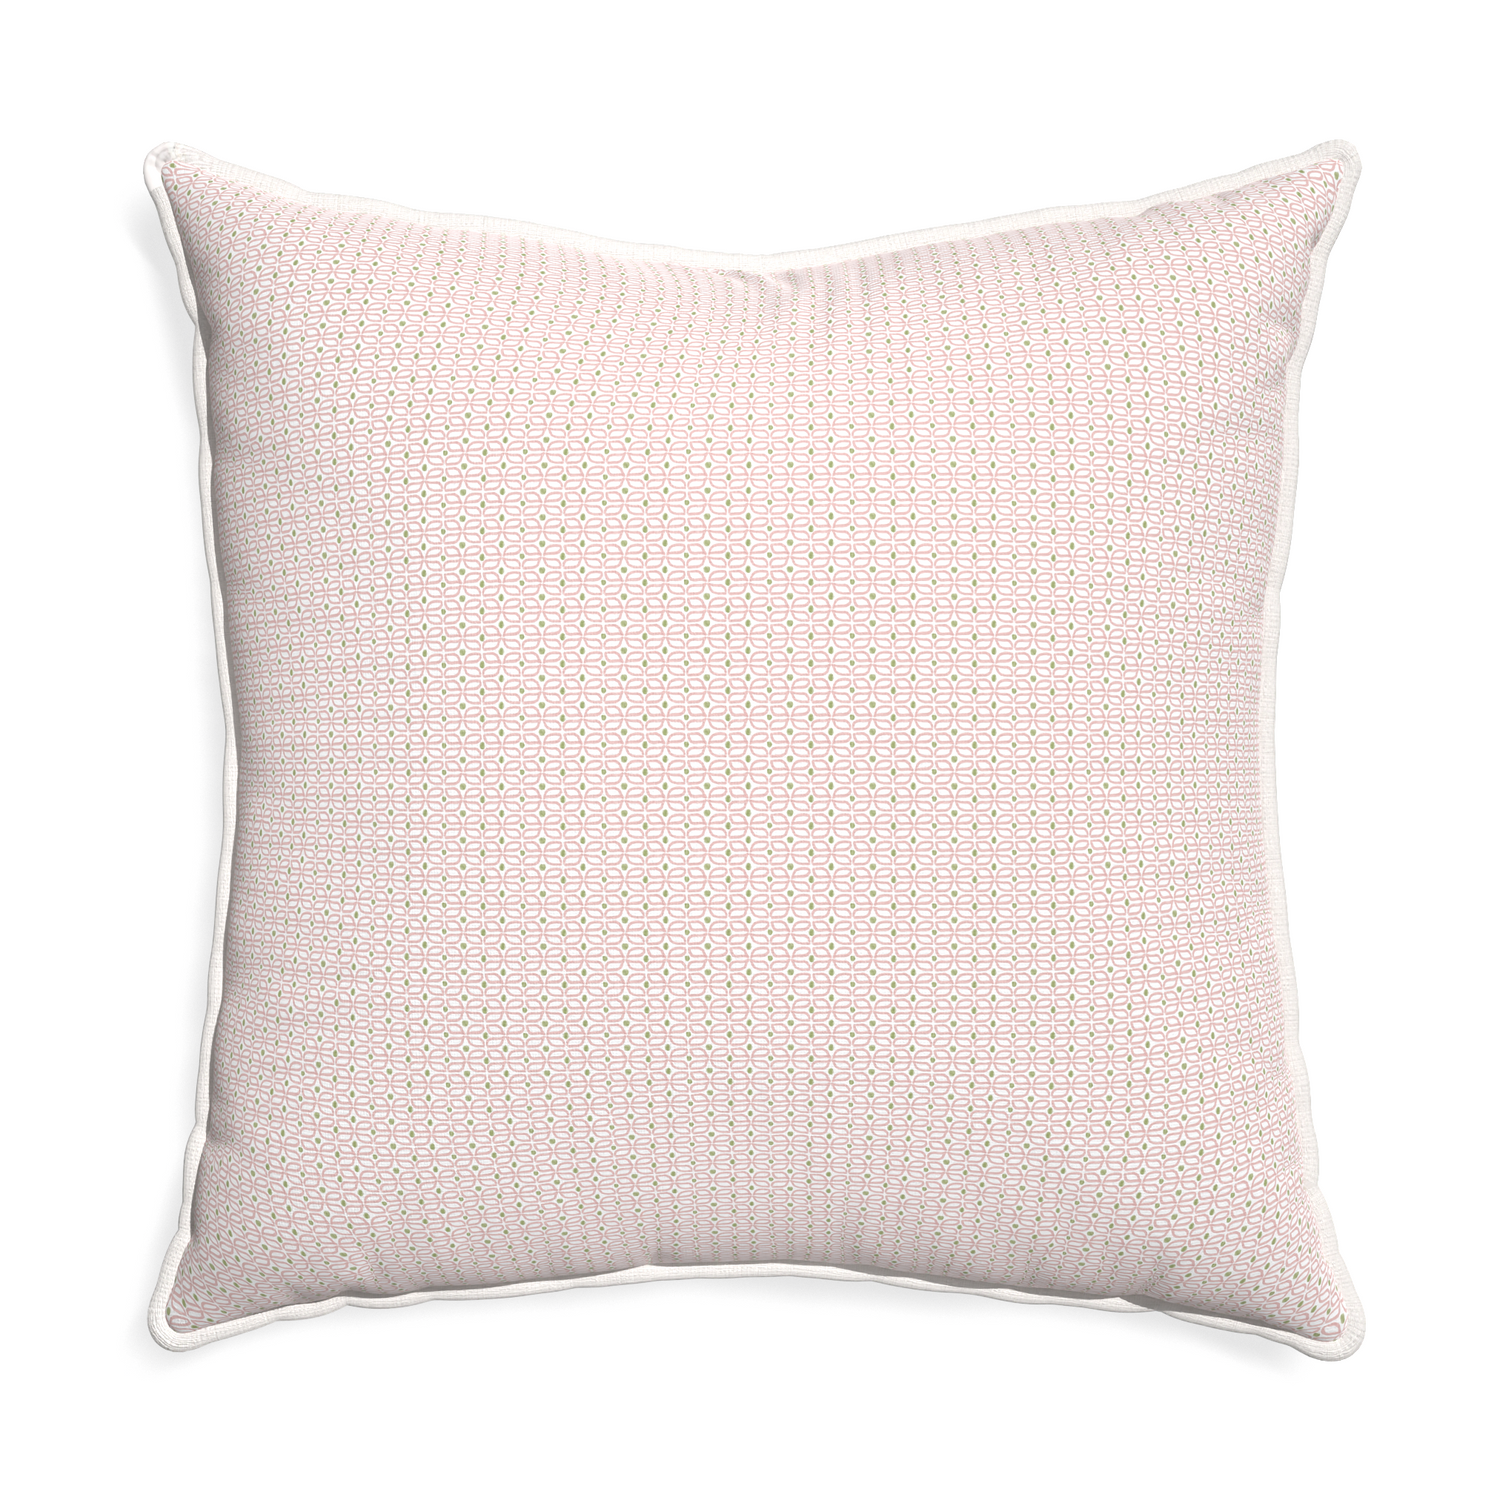 Euro-sham loomi pink custom pink geometricpillow with snow piping on white background